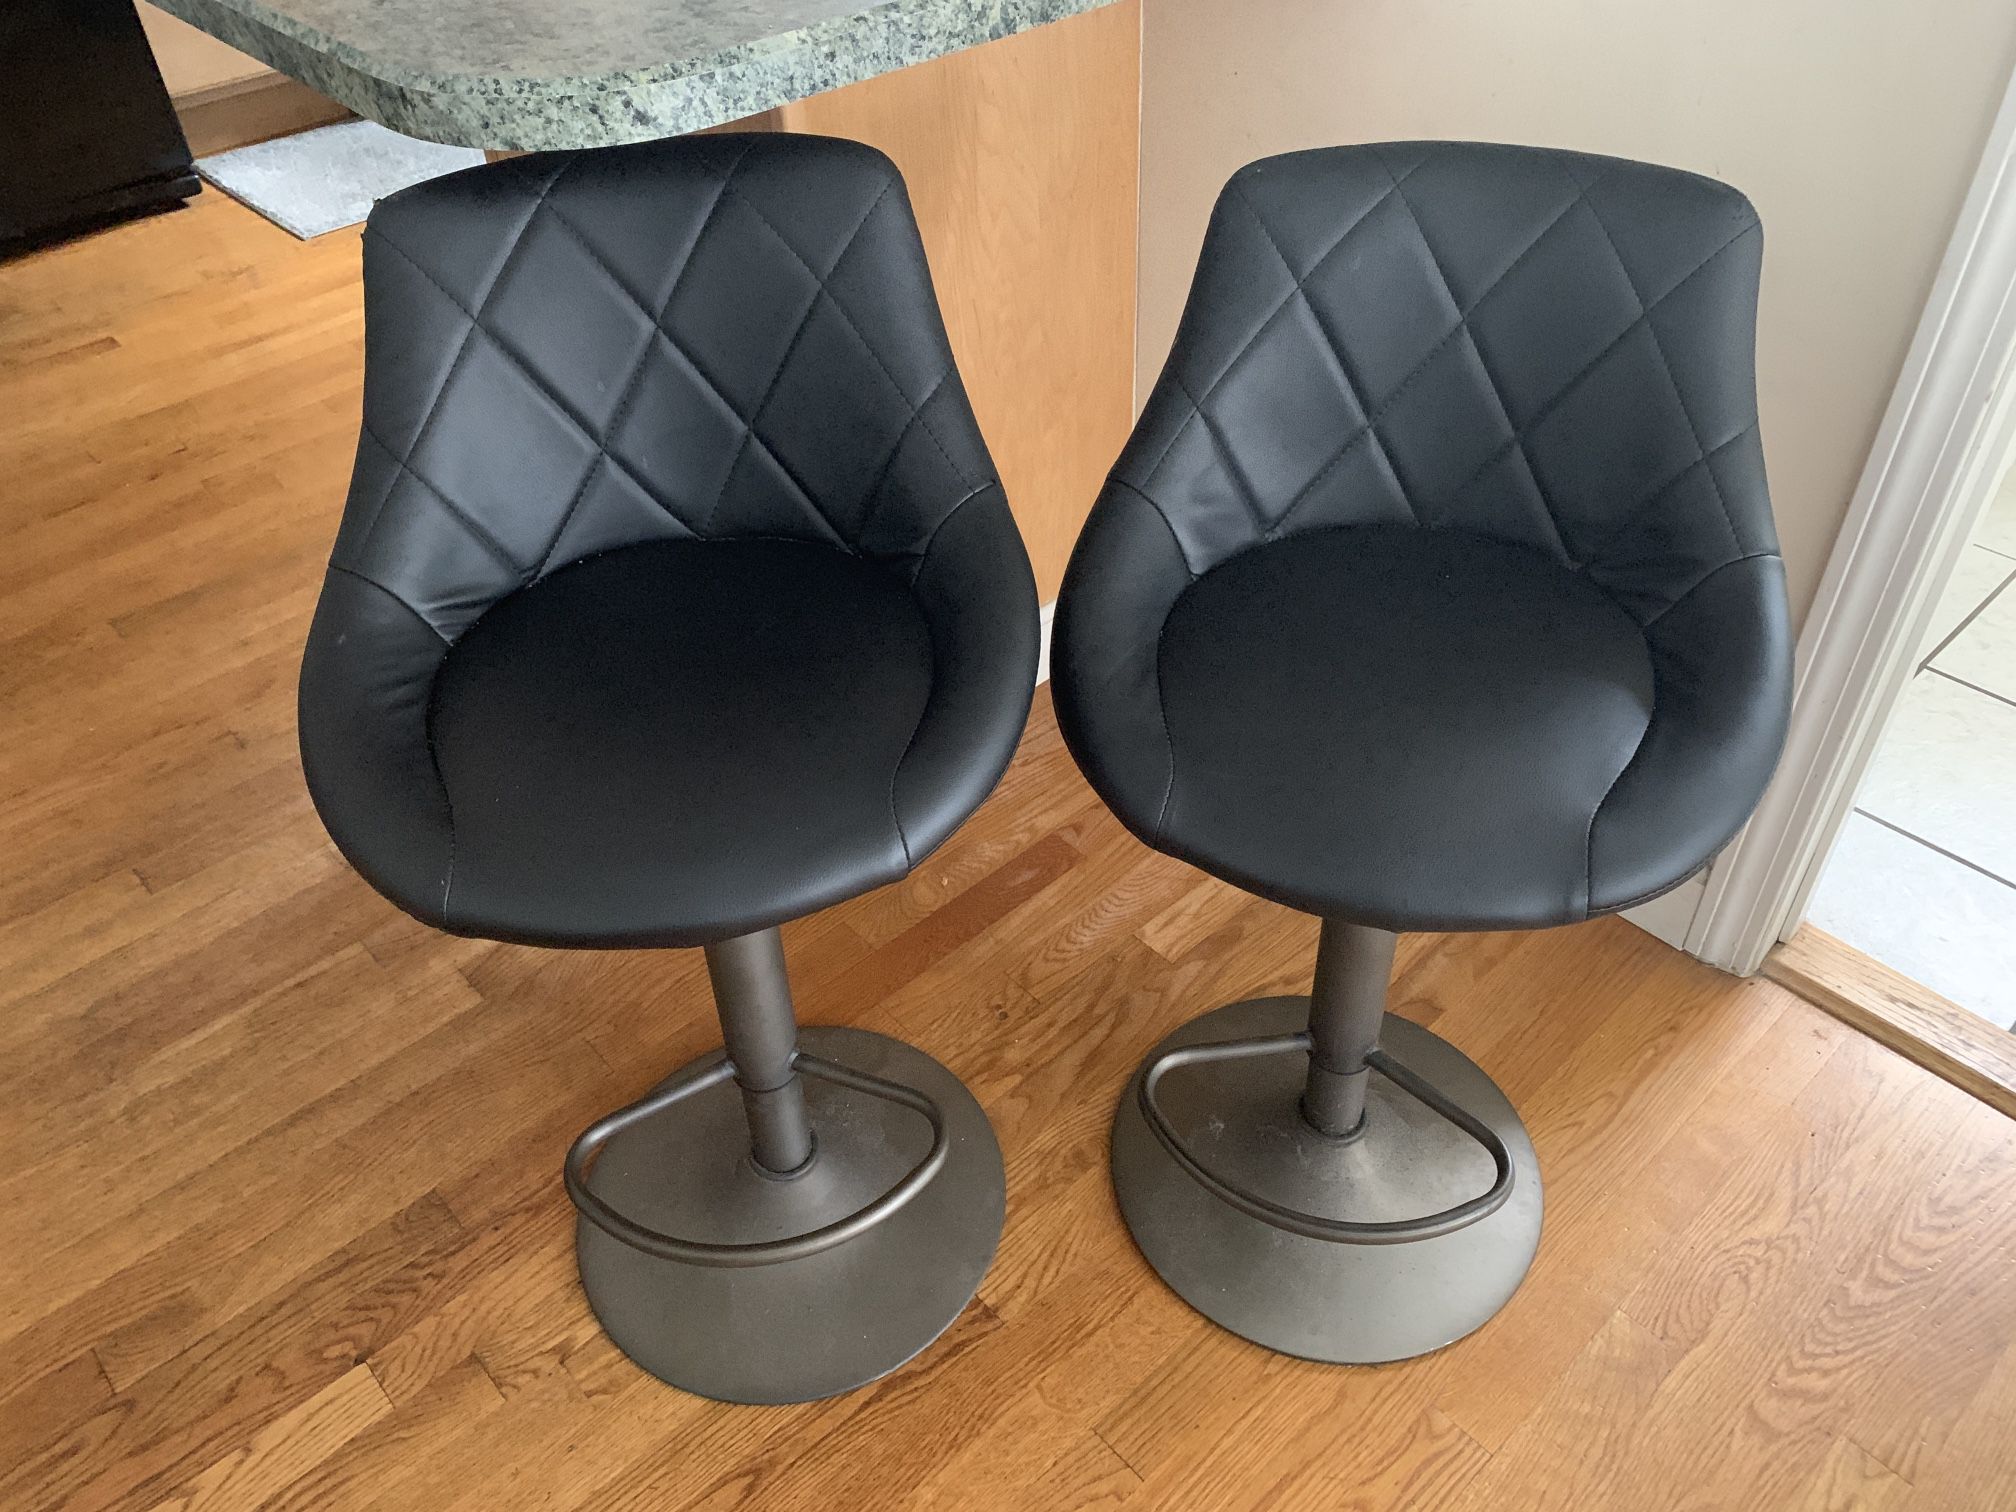 Leather (or faux leather) Bar Stools. Adjustable. Perfect for a small breakfast area or bar.